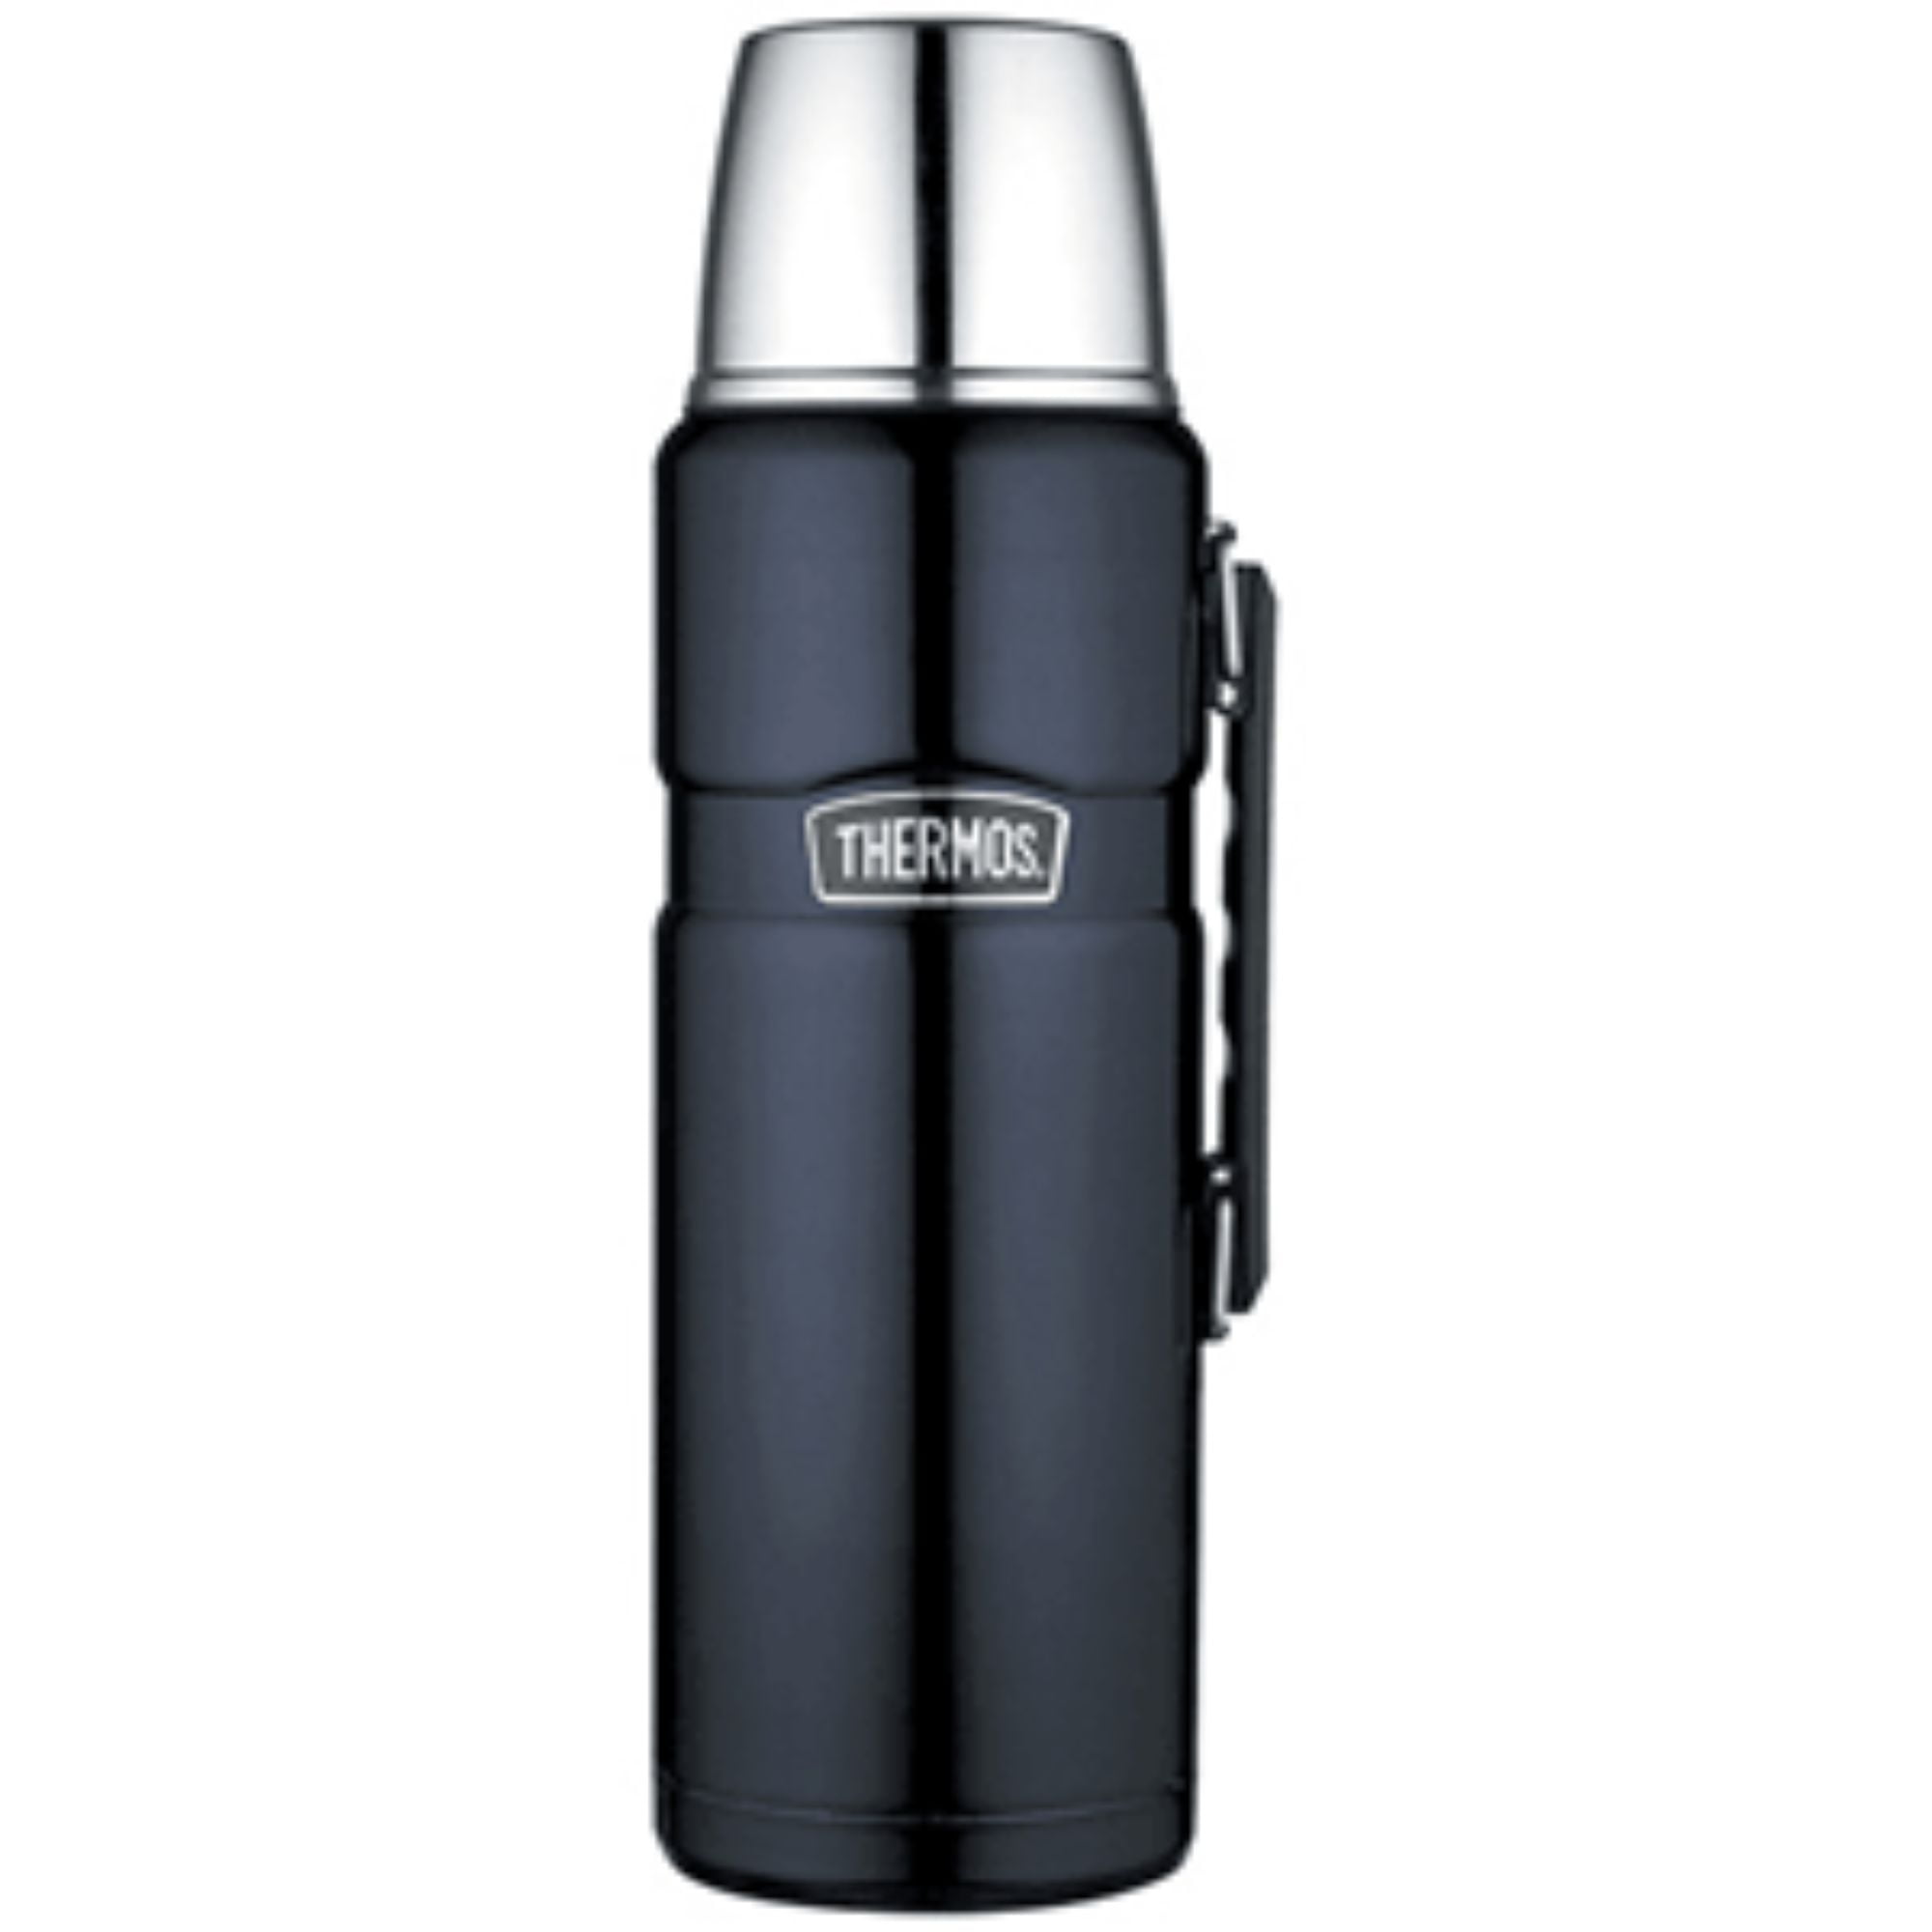 Bene Casa 0.5-liter Capacity Thermos w/ Double Wall Vaccum Insulation